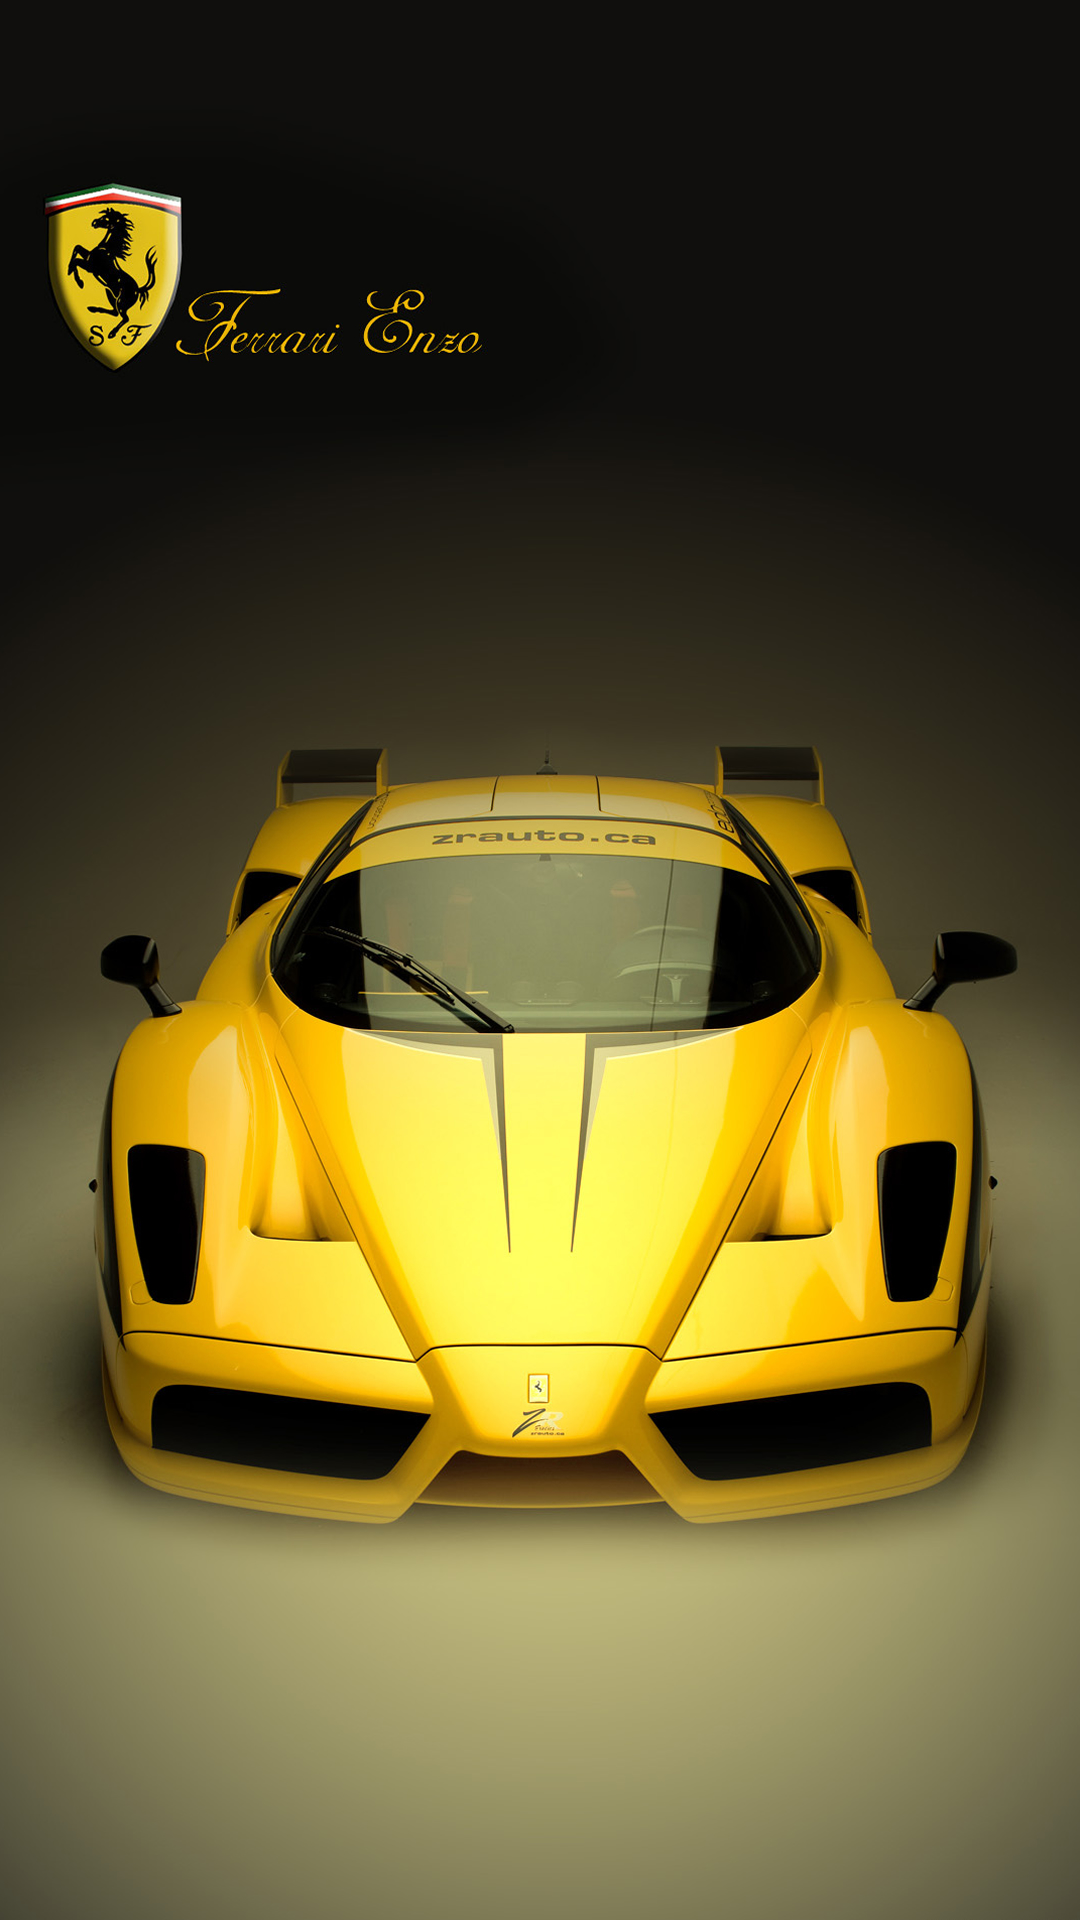 Cars iPhone Wallpaper Android wallpaper